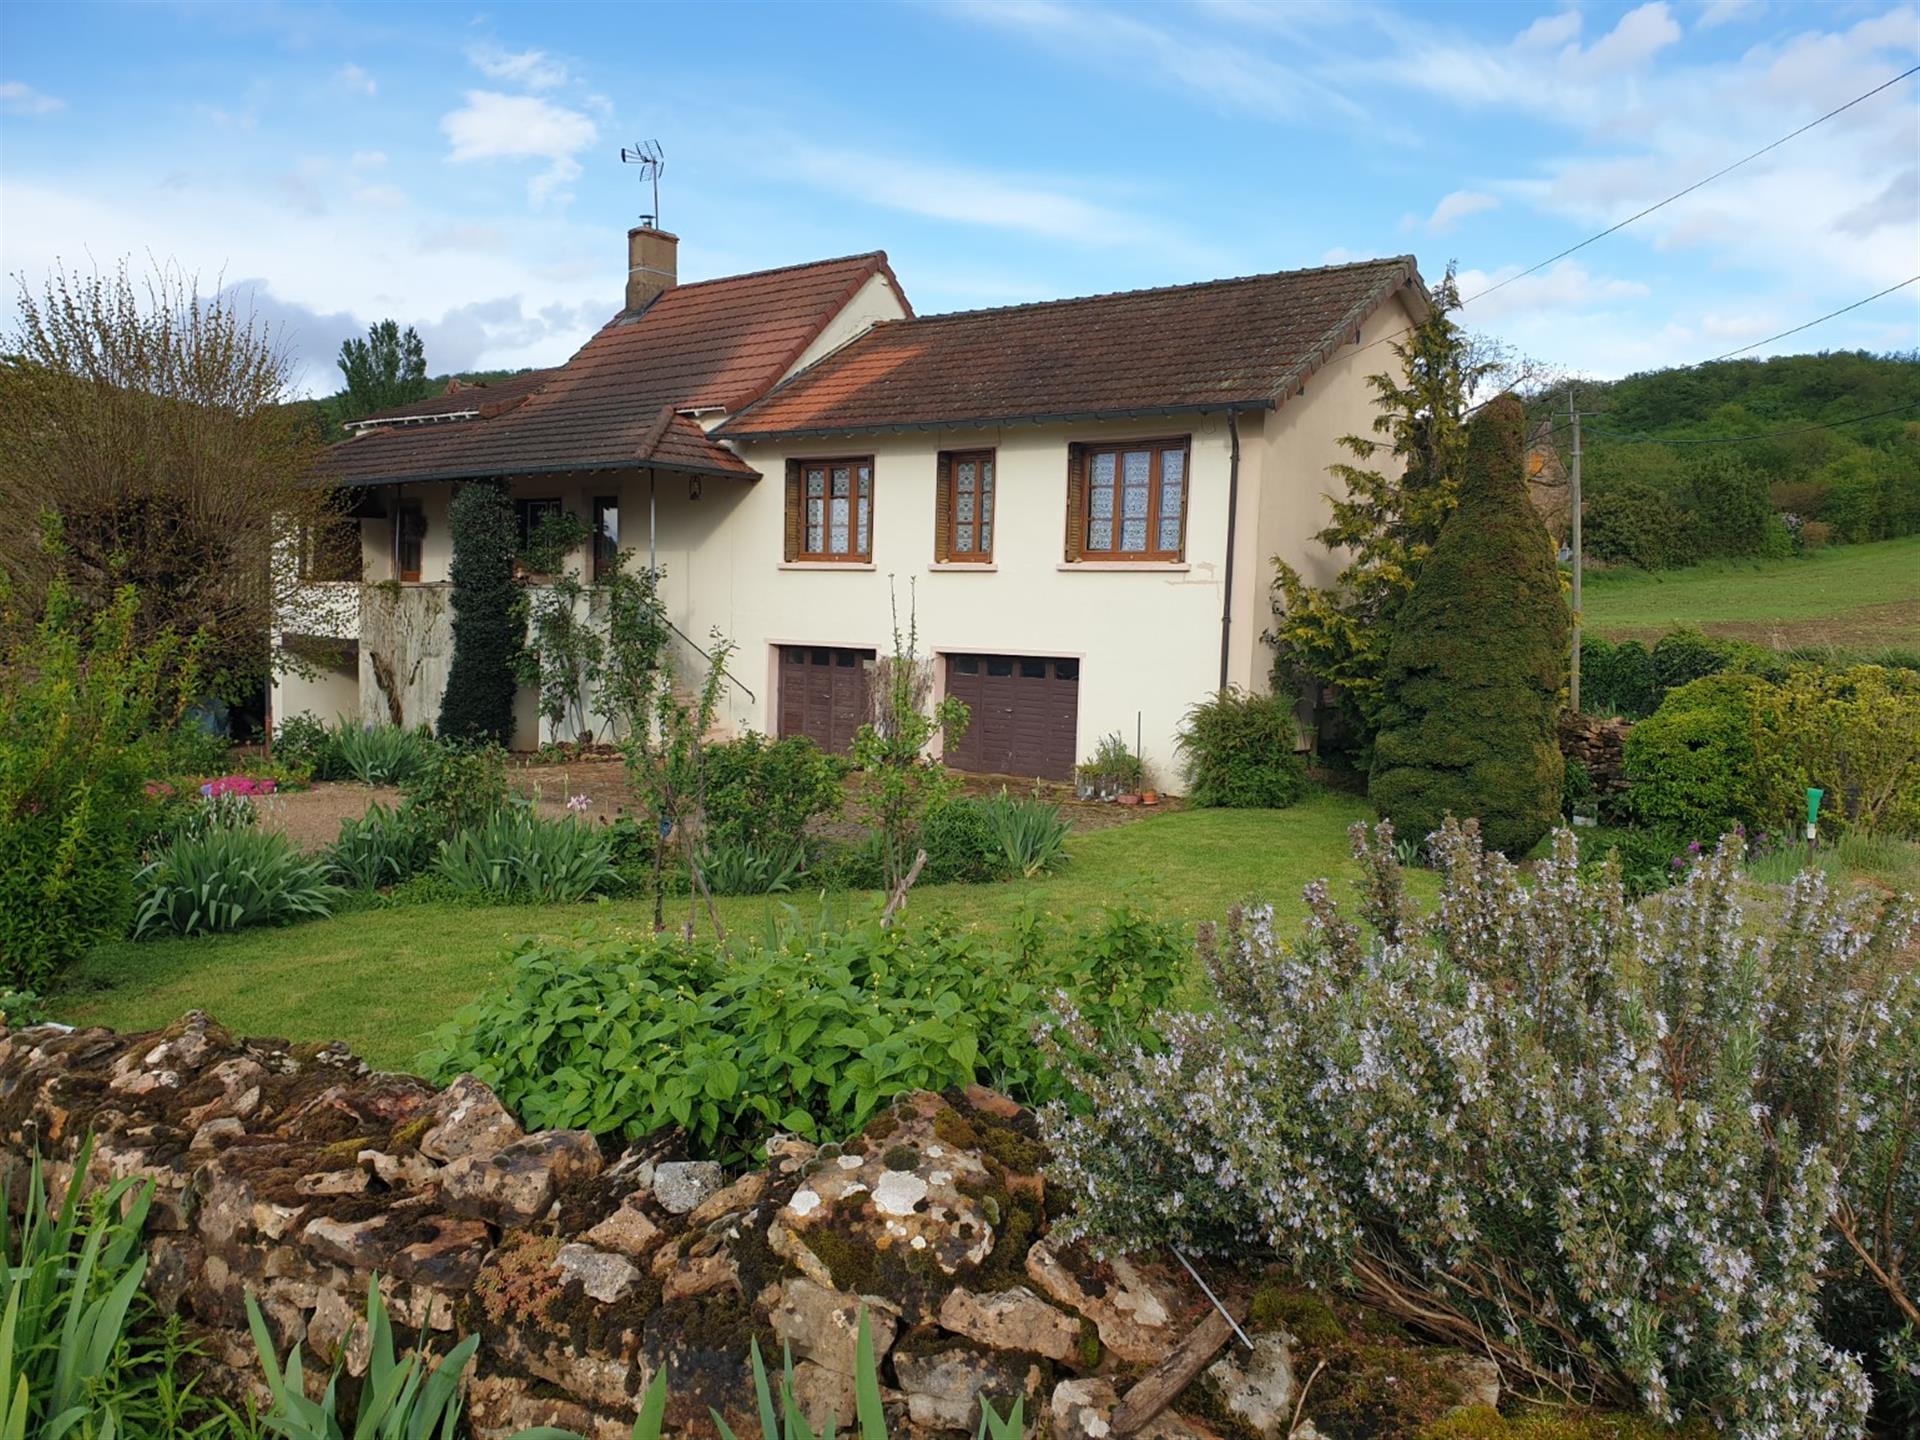 Beautiful location on the outskirts of the village. Old house with small garden.